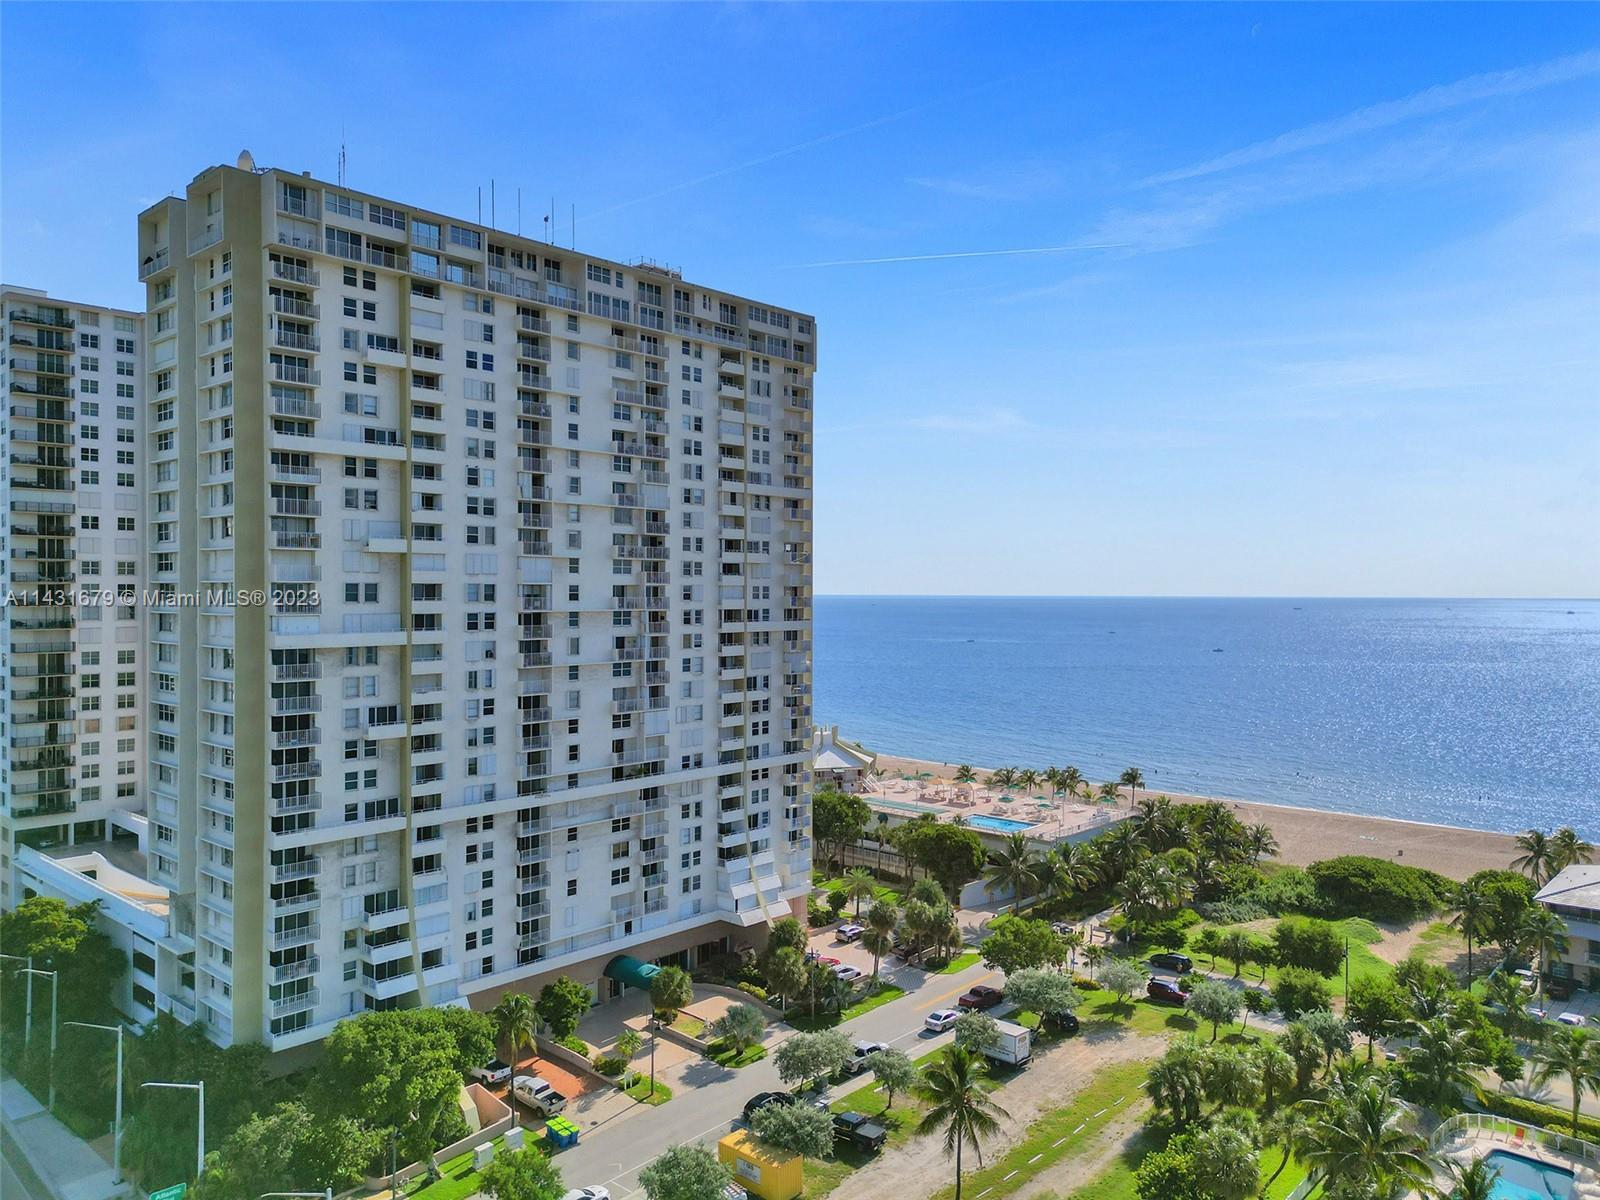 MUST SEE THIS COMPLETELY RENOVATED 1-BEDROOM AND 1-BATHROOM UNIT WITH BEAUTIFUL SOUTHEAST OCEAN AND 